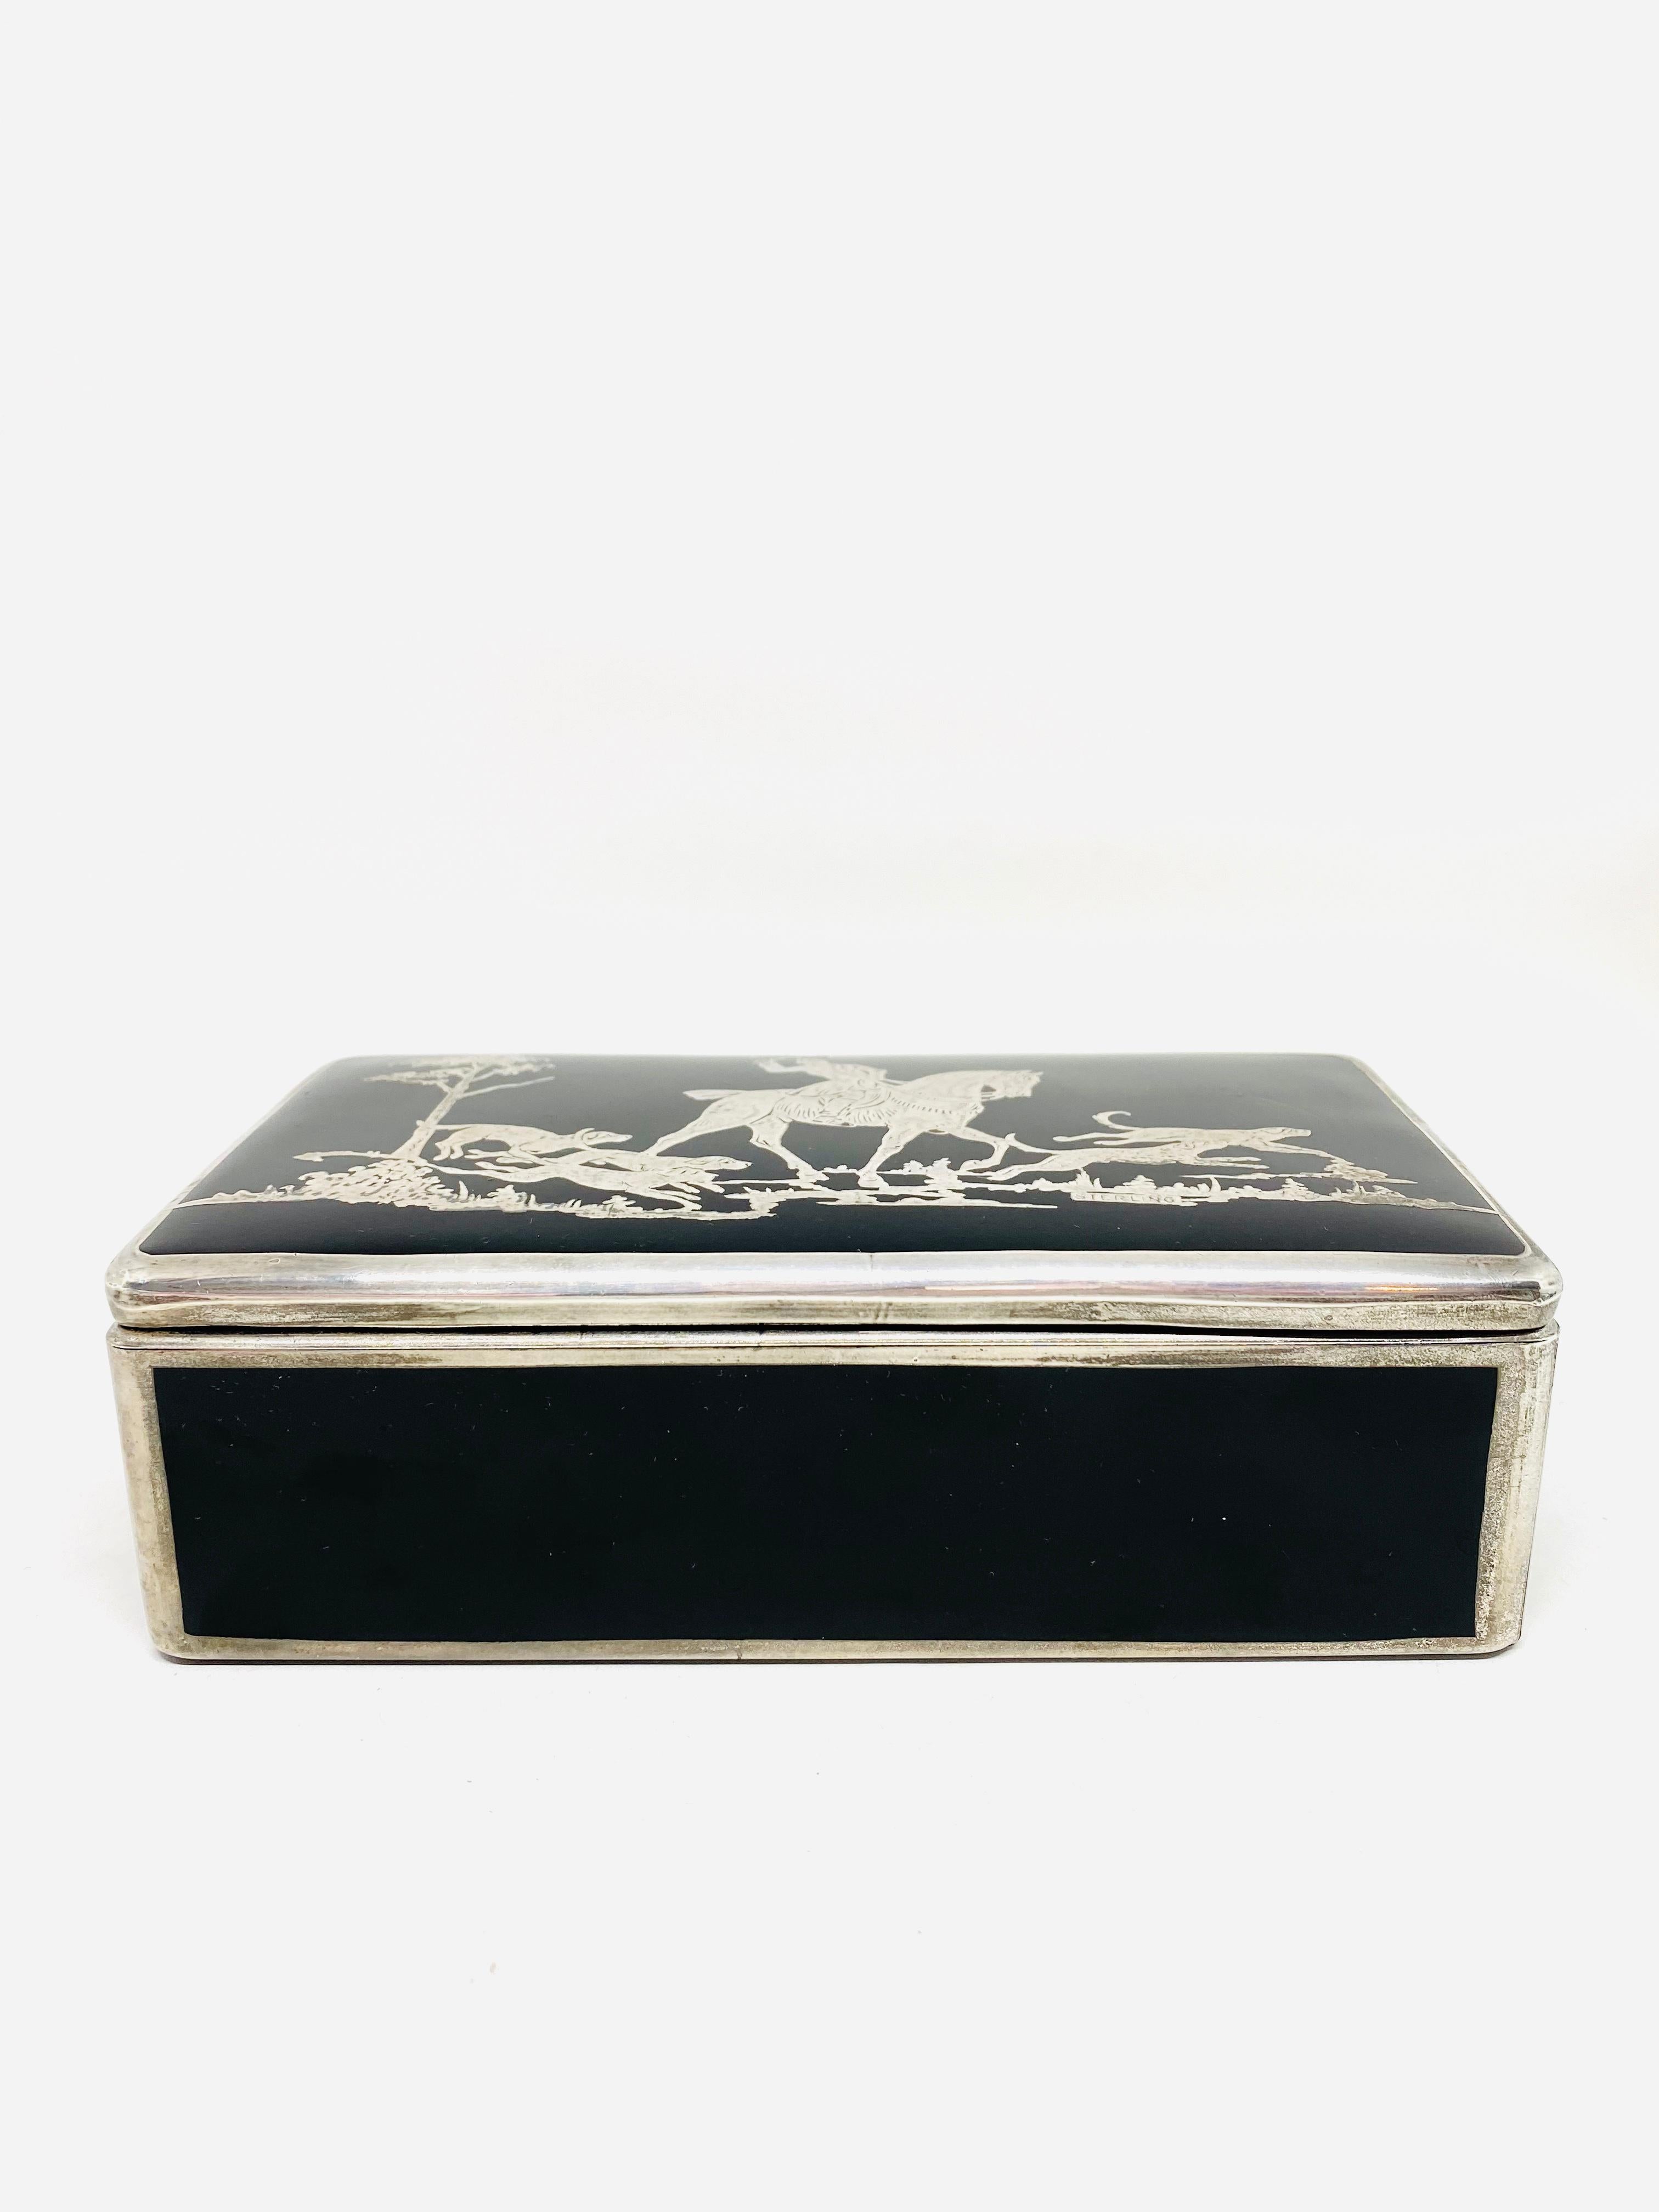 1920s Bohemian Sterling Silver and Glass Jewelry Box

Product details:
Black glass box with sterling silver overlay detail
Hunting scene hand done
